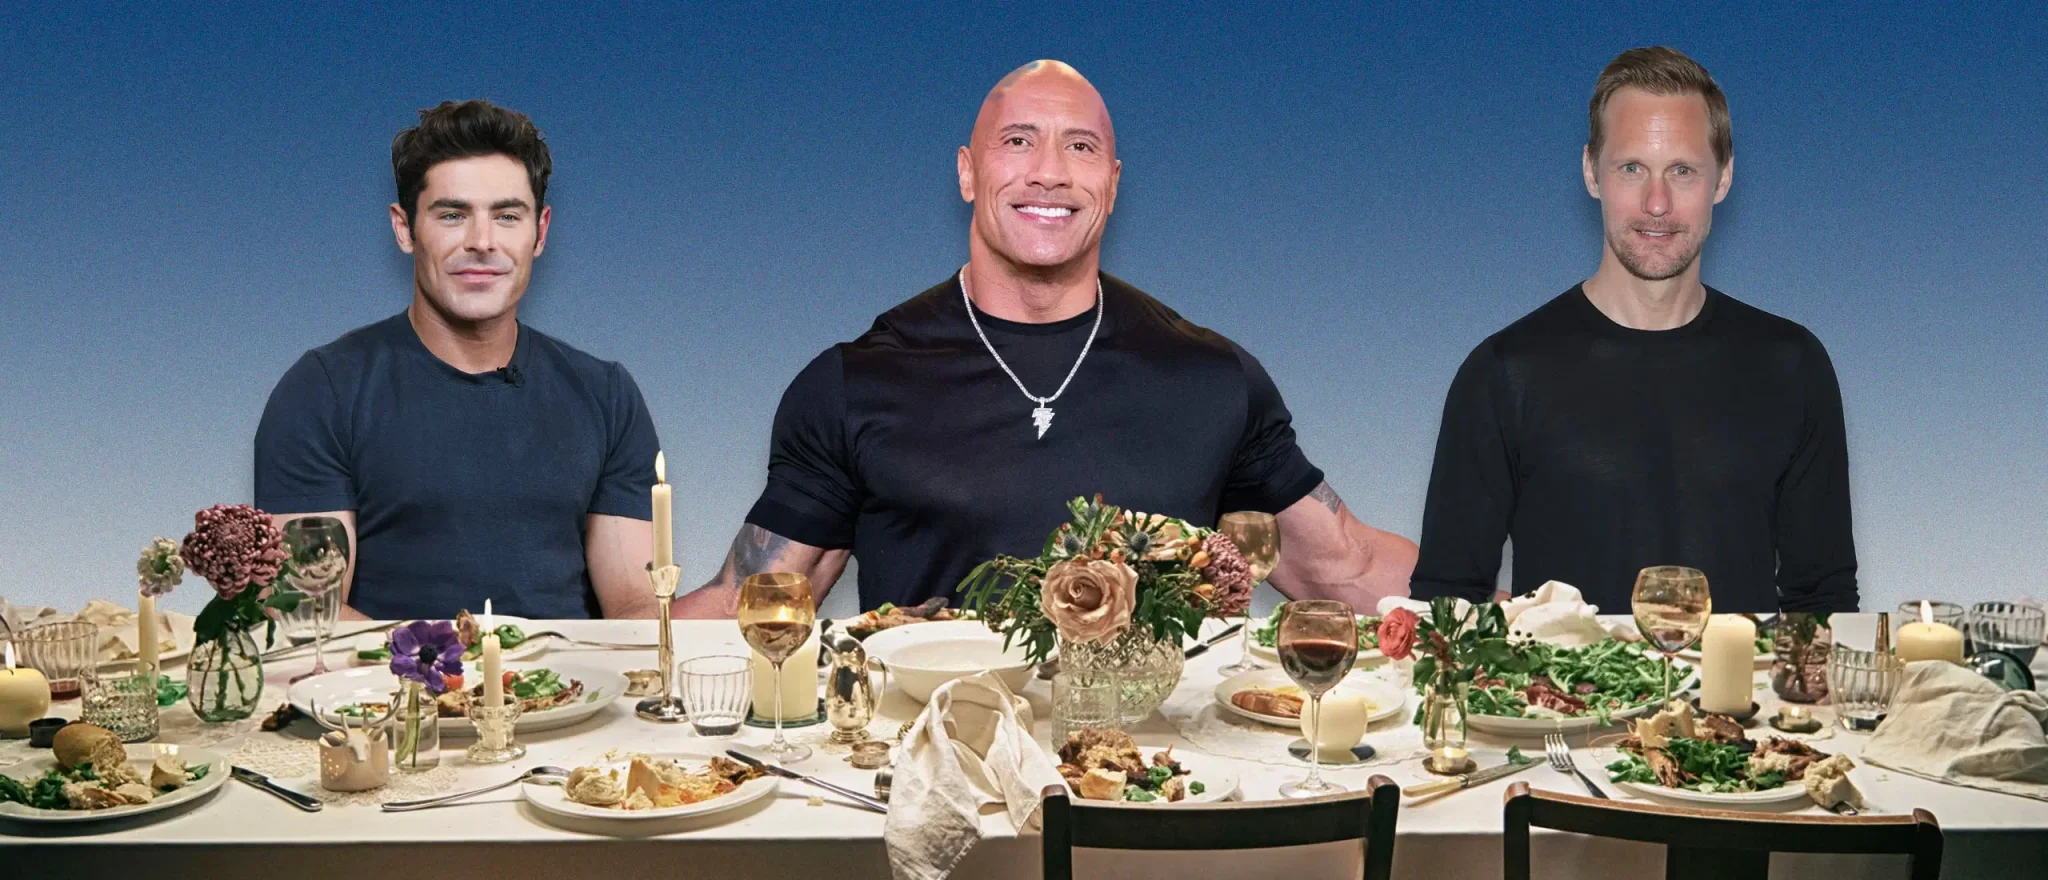 11 Celebrities Who Eat Large on Cheat Meal Day